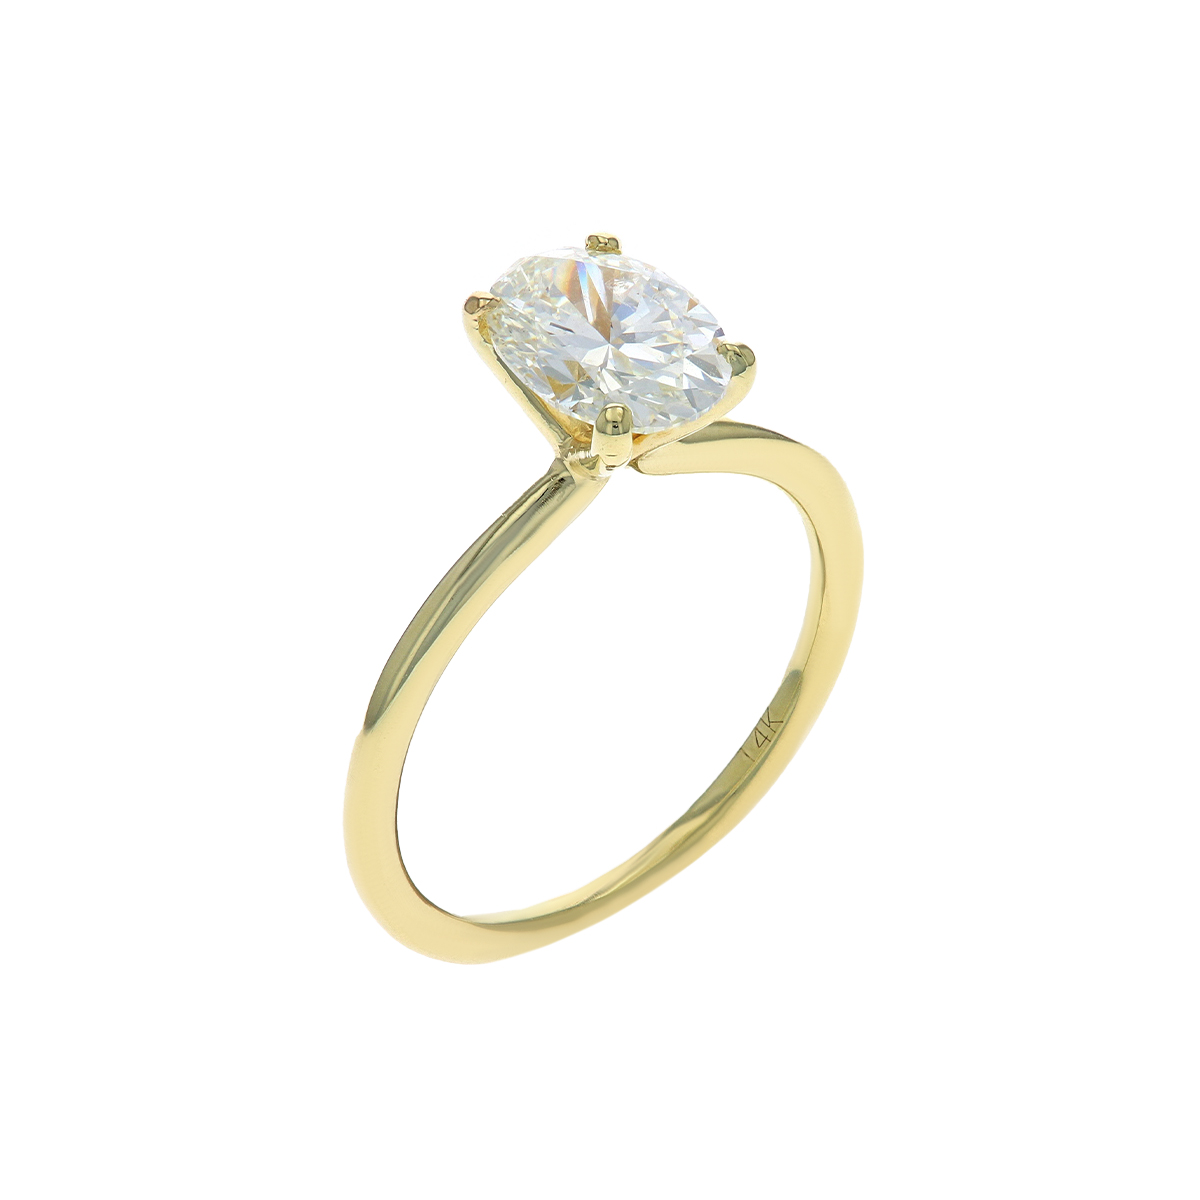 14K Yellow Gold 1.54 Carat Oval Diamond Solitaire Engagement Ring